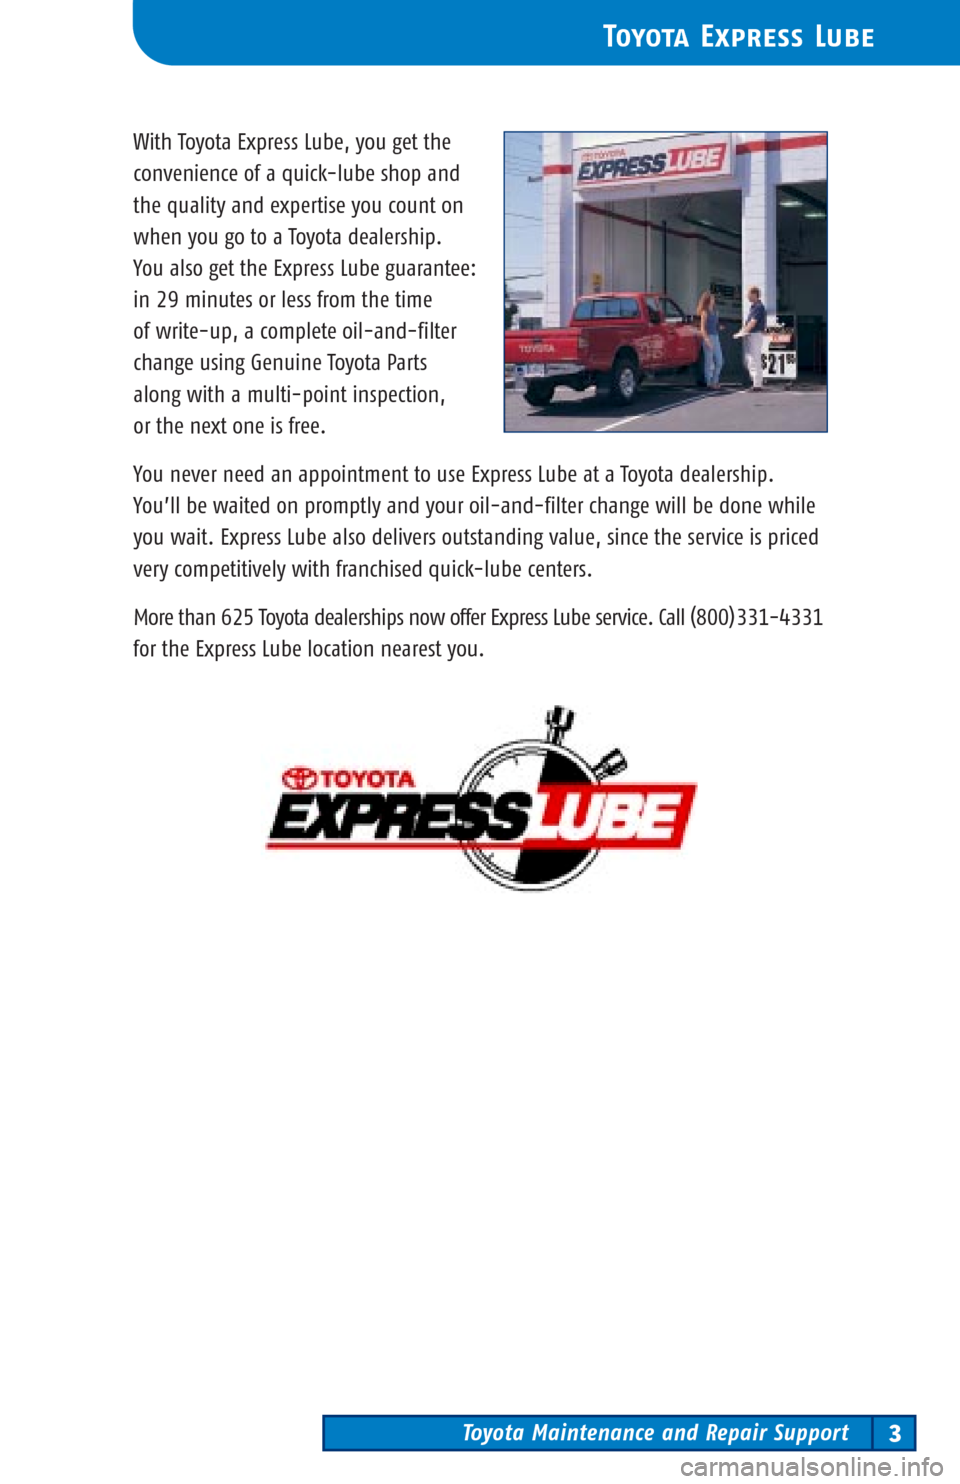 TOYOTA 4RUNNER 2002 N210 / 4.G Scheduled Maintenance Guide Toyota Maintenance and Repair Support3
Toyota Express Lube
With Toyota Express Lube, you get the
convenience of a quick-lube shop and 
the quality and expertise you count on
when you go to a Toyota de